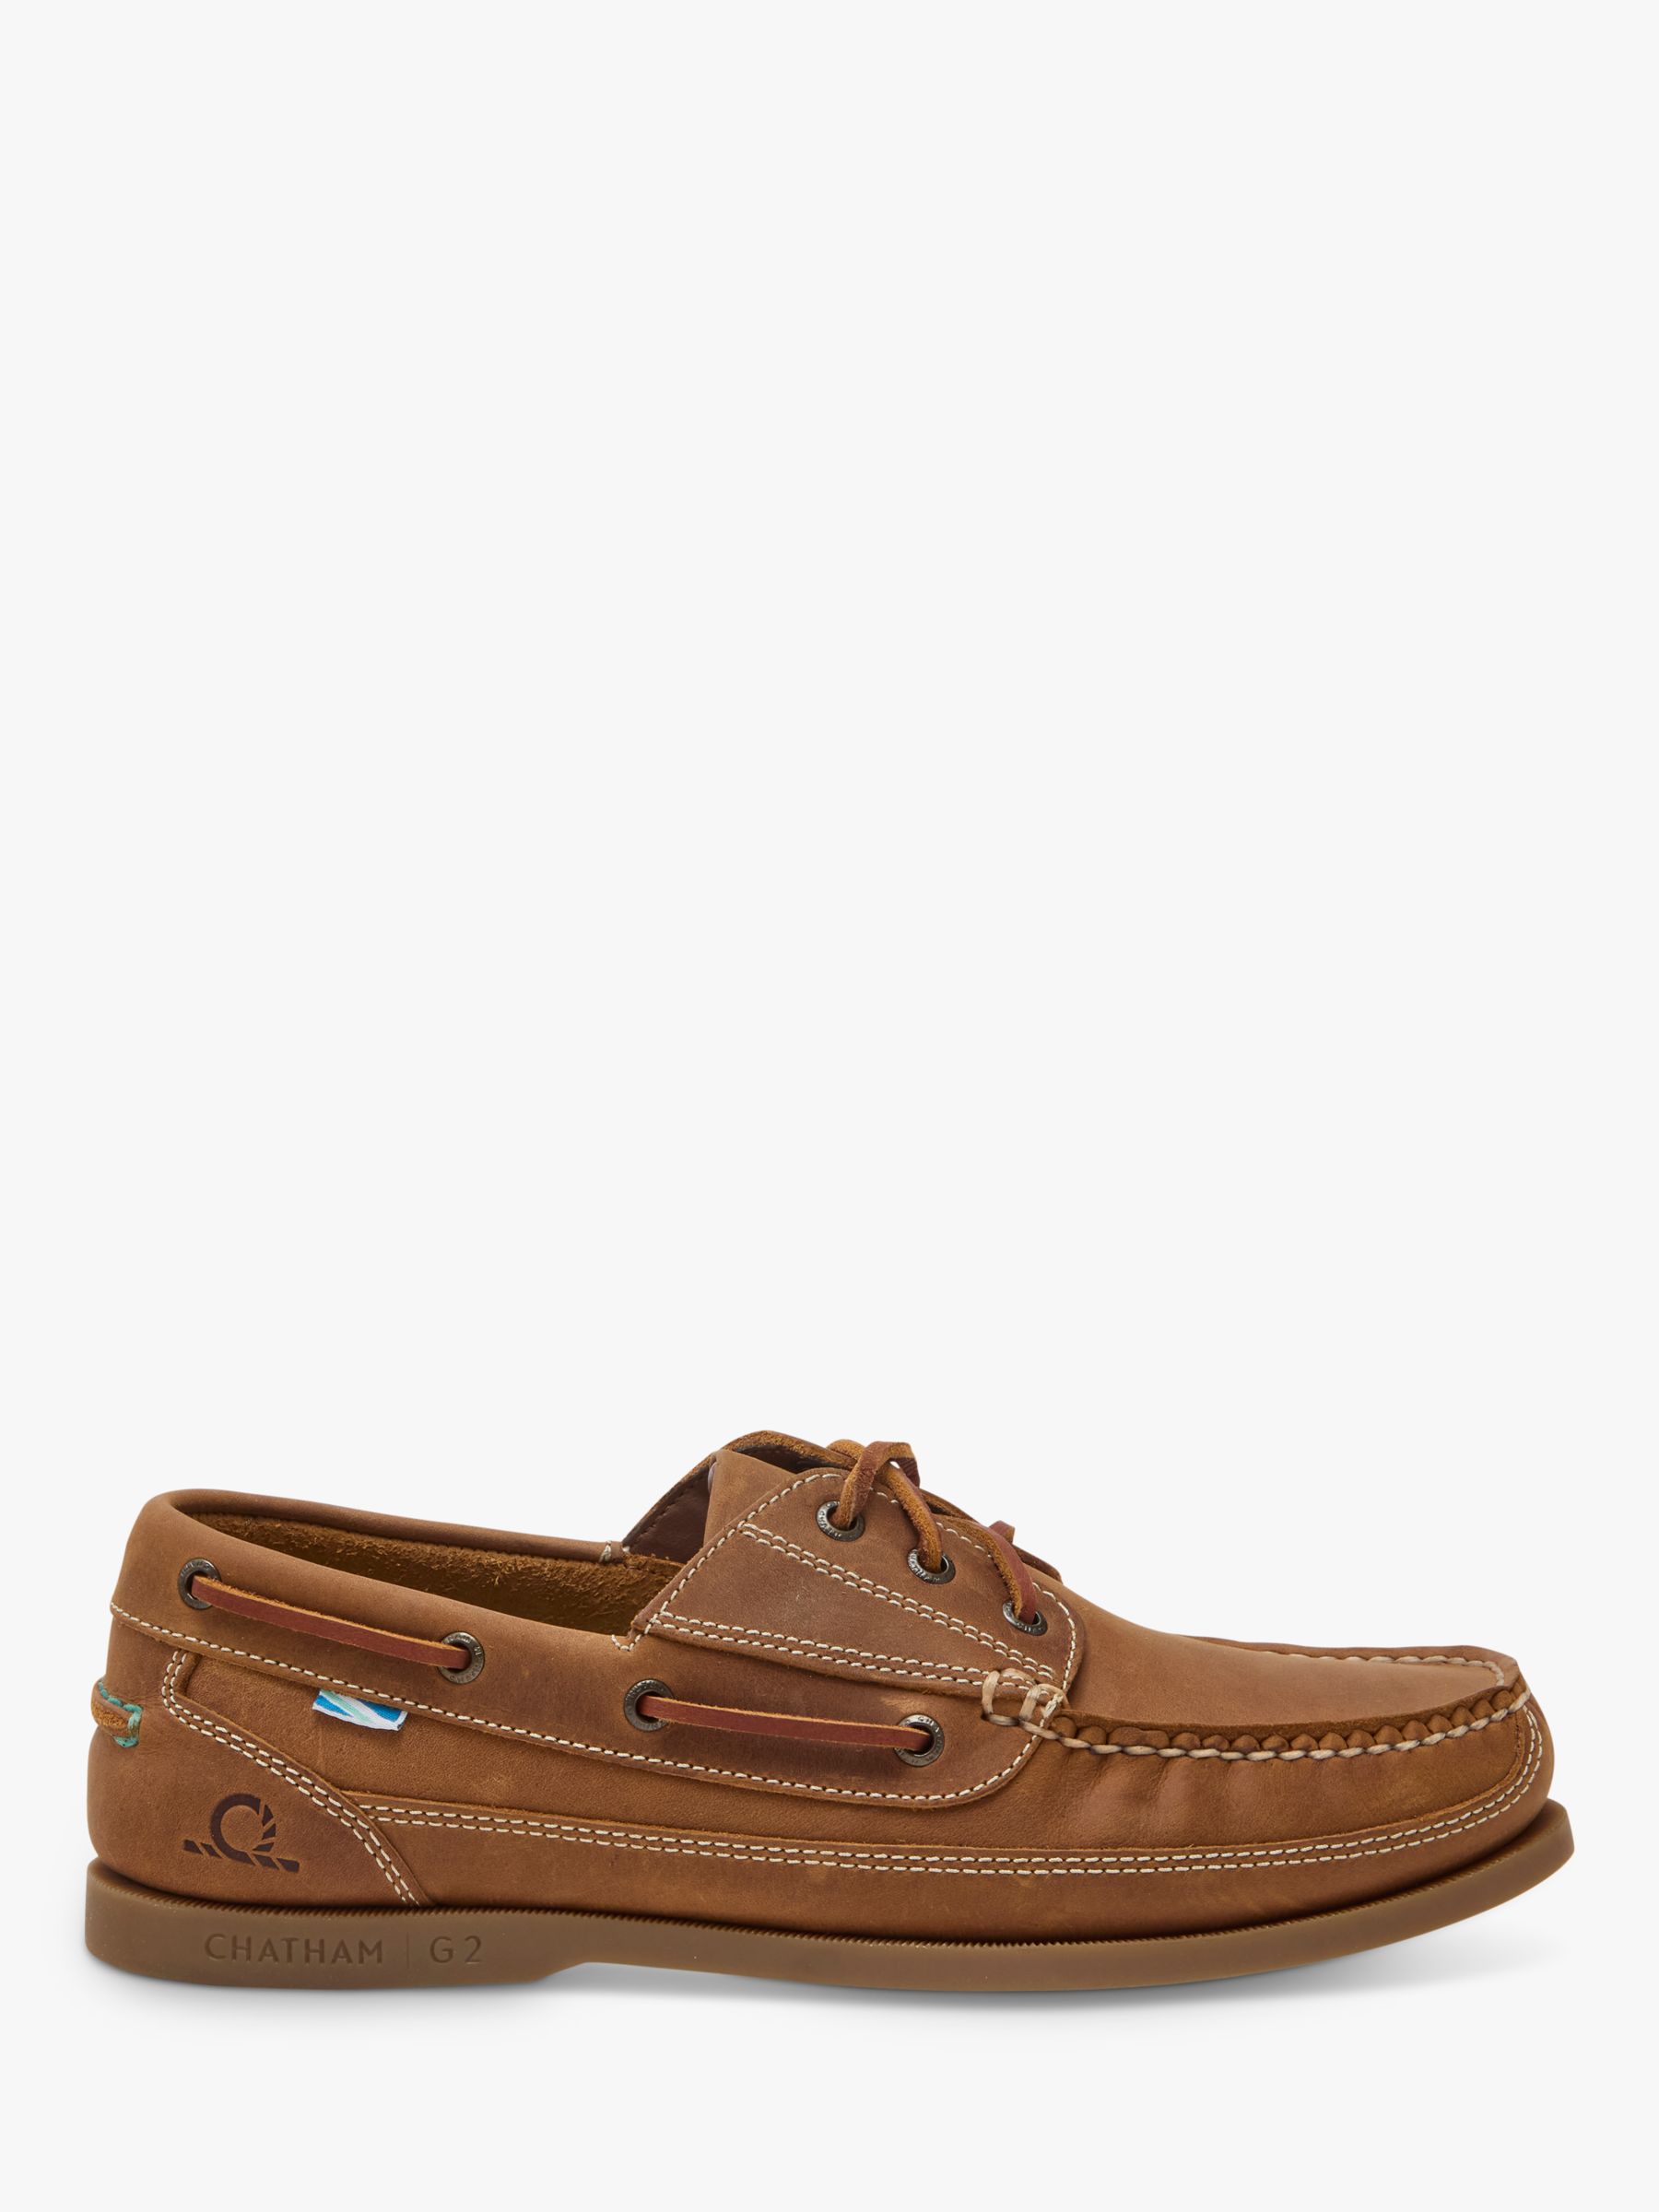 Chatham Rockwell II G2 Leather Boat Shoes, Light brown at John Lewis ...